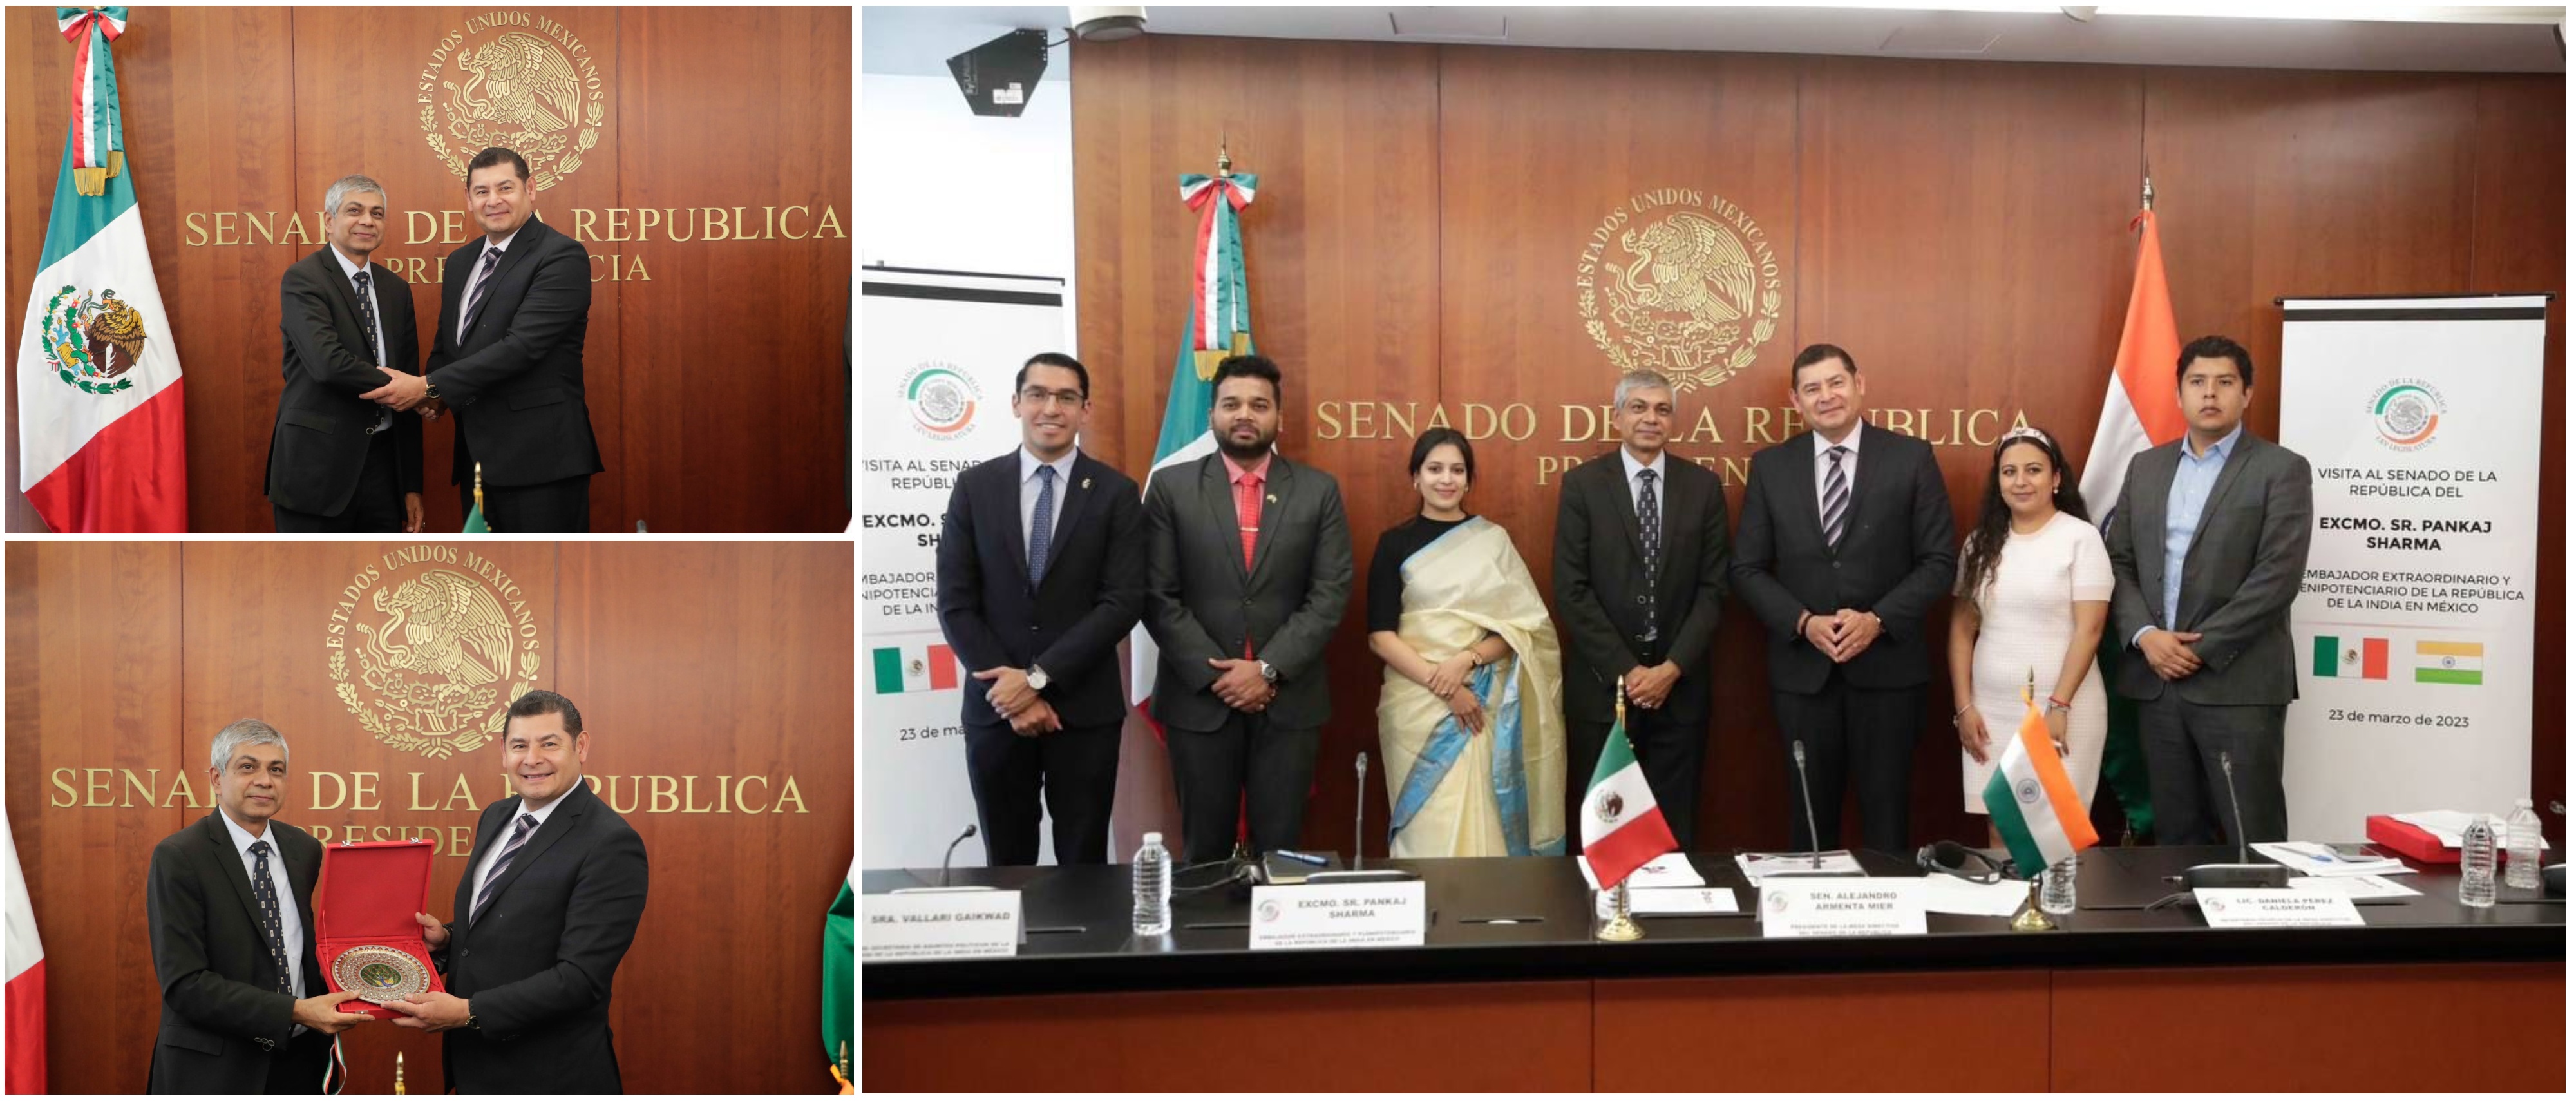  <div style="fcolor: #fff; font-weight: 600; font-size: 1.5em;">
<p style="font-size: 13.8px;">
Amb. Dr. Pankaj Sharma and officers from the embassy met with Hon’ble President of Senate of Mexico, H.E. Mr. Alejandro Armenta. There was a discussion on strengthening of bilateral relations between India and Mexico with our Parliaments playing an important role. We look forward to having Hon’ble President in India later this year for #P20 forum. 

<br /><span style="text-align: center;">23 March 2023</span></p>
</div>